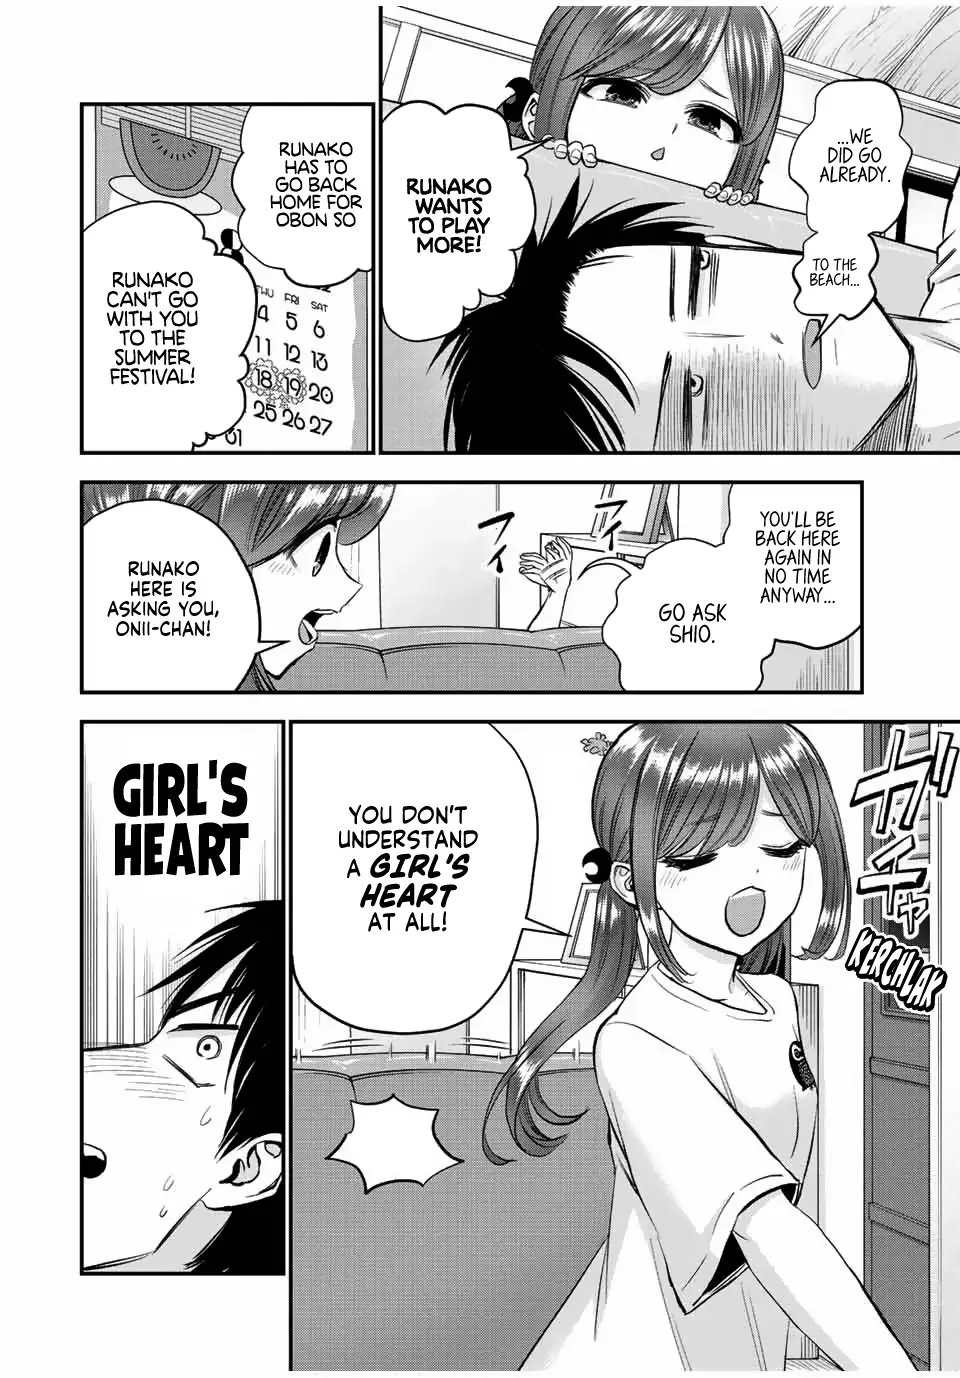 No More Love With The Girls - 22 page 2-7dc35728